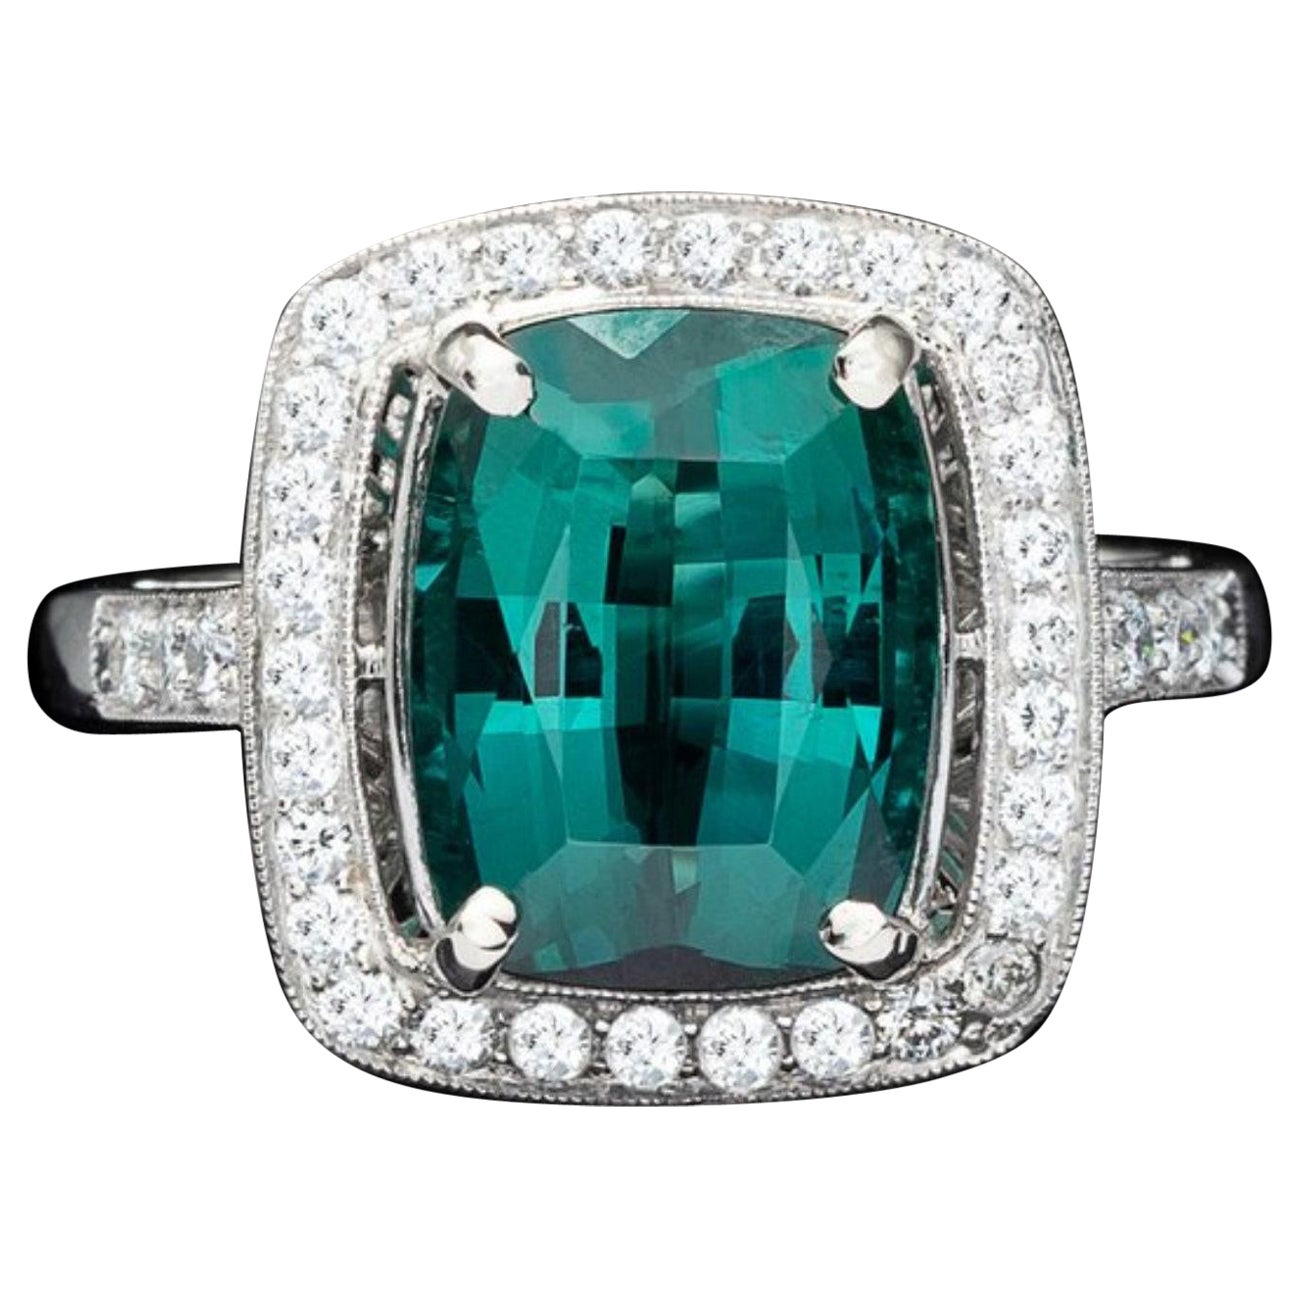 For Sale:  4 Carat Cushion Cut Emerald Engagement Ring Vintage Emerald White Gold Ring